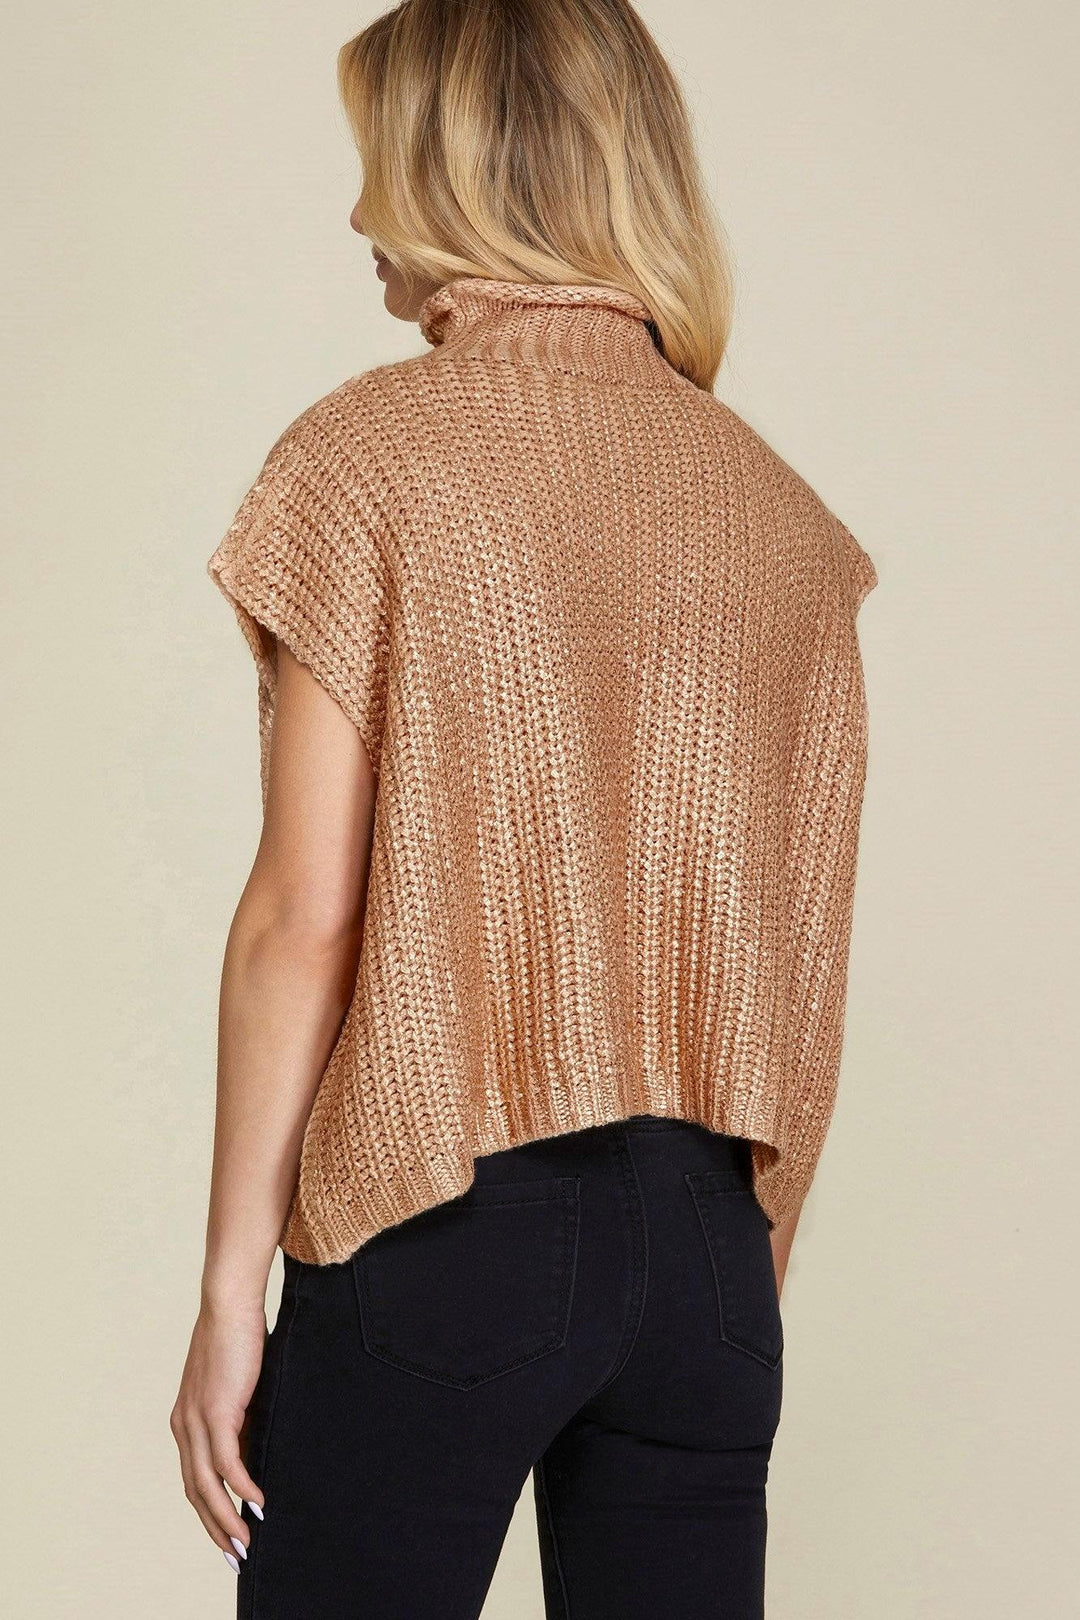 Metallic Foil Sweater Top rose gold she and sky brand online boutique